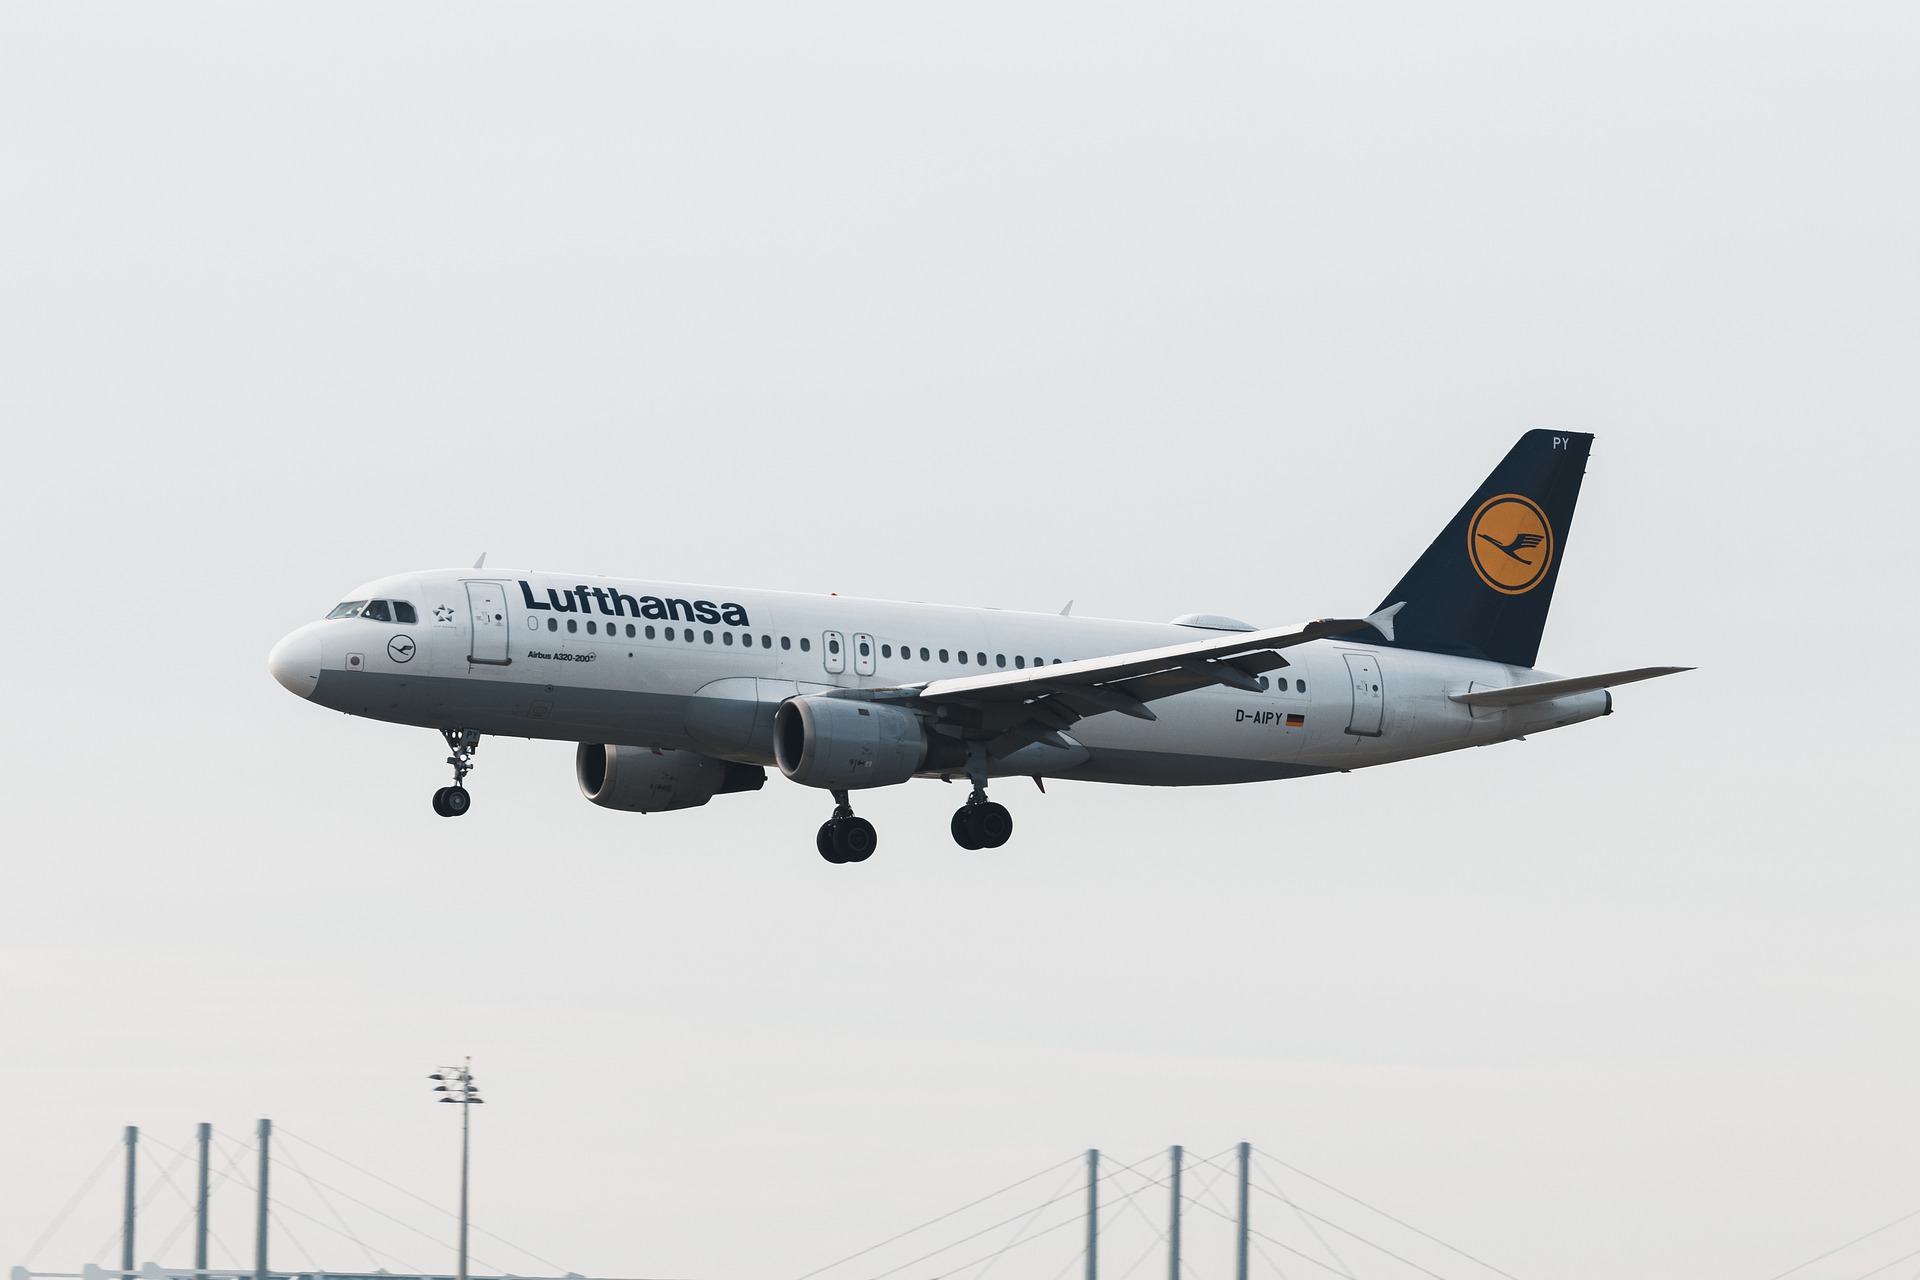 Lufthansa  D-AIPY Airbus A320-211 by Dominic Wunderlich